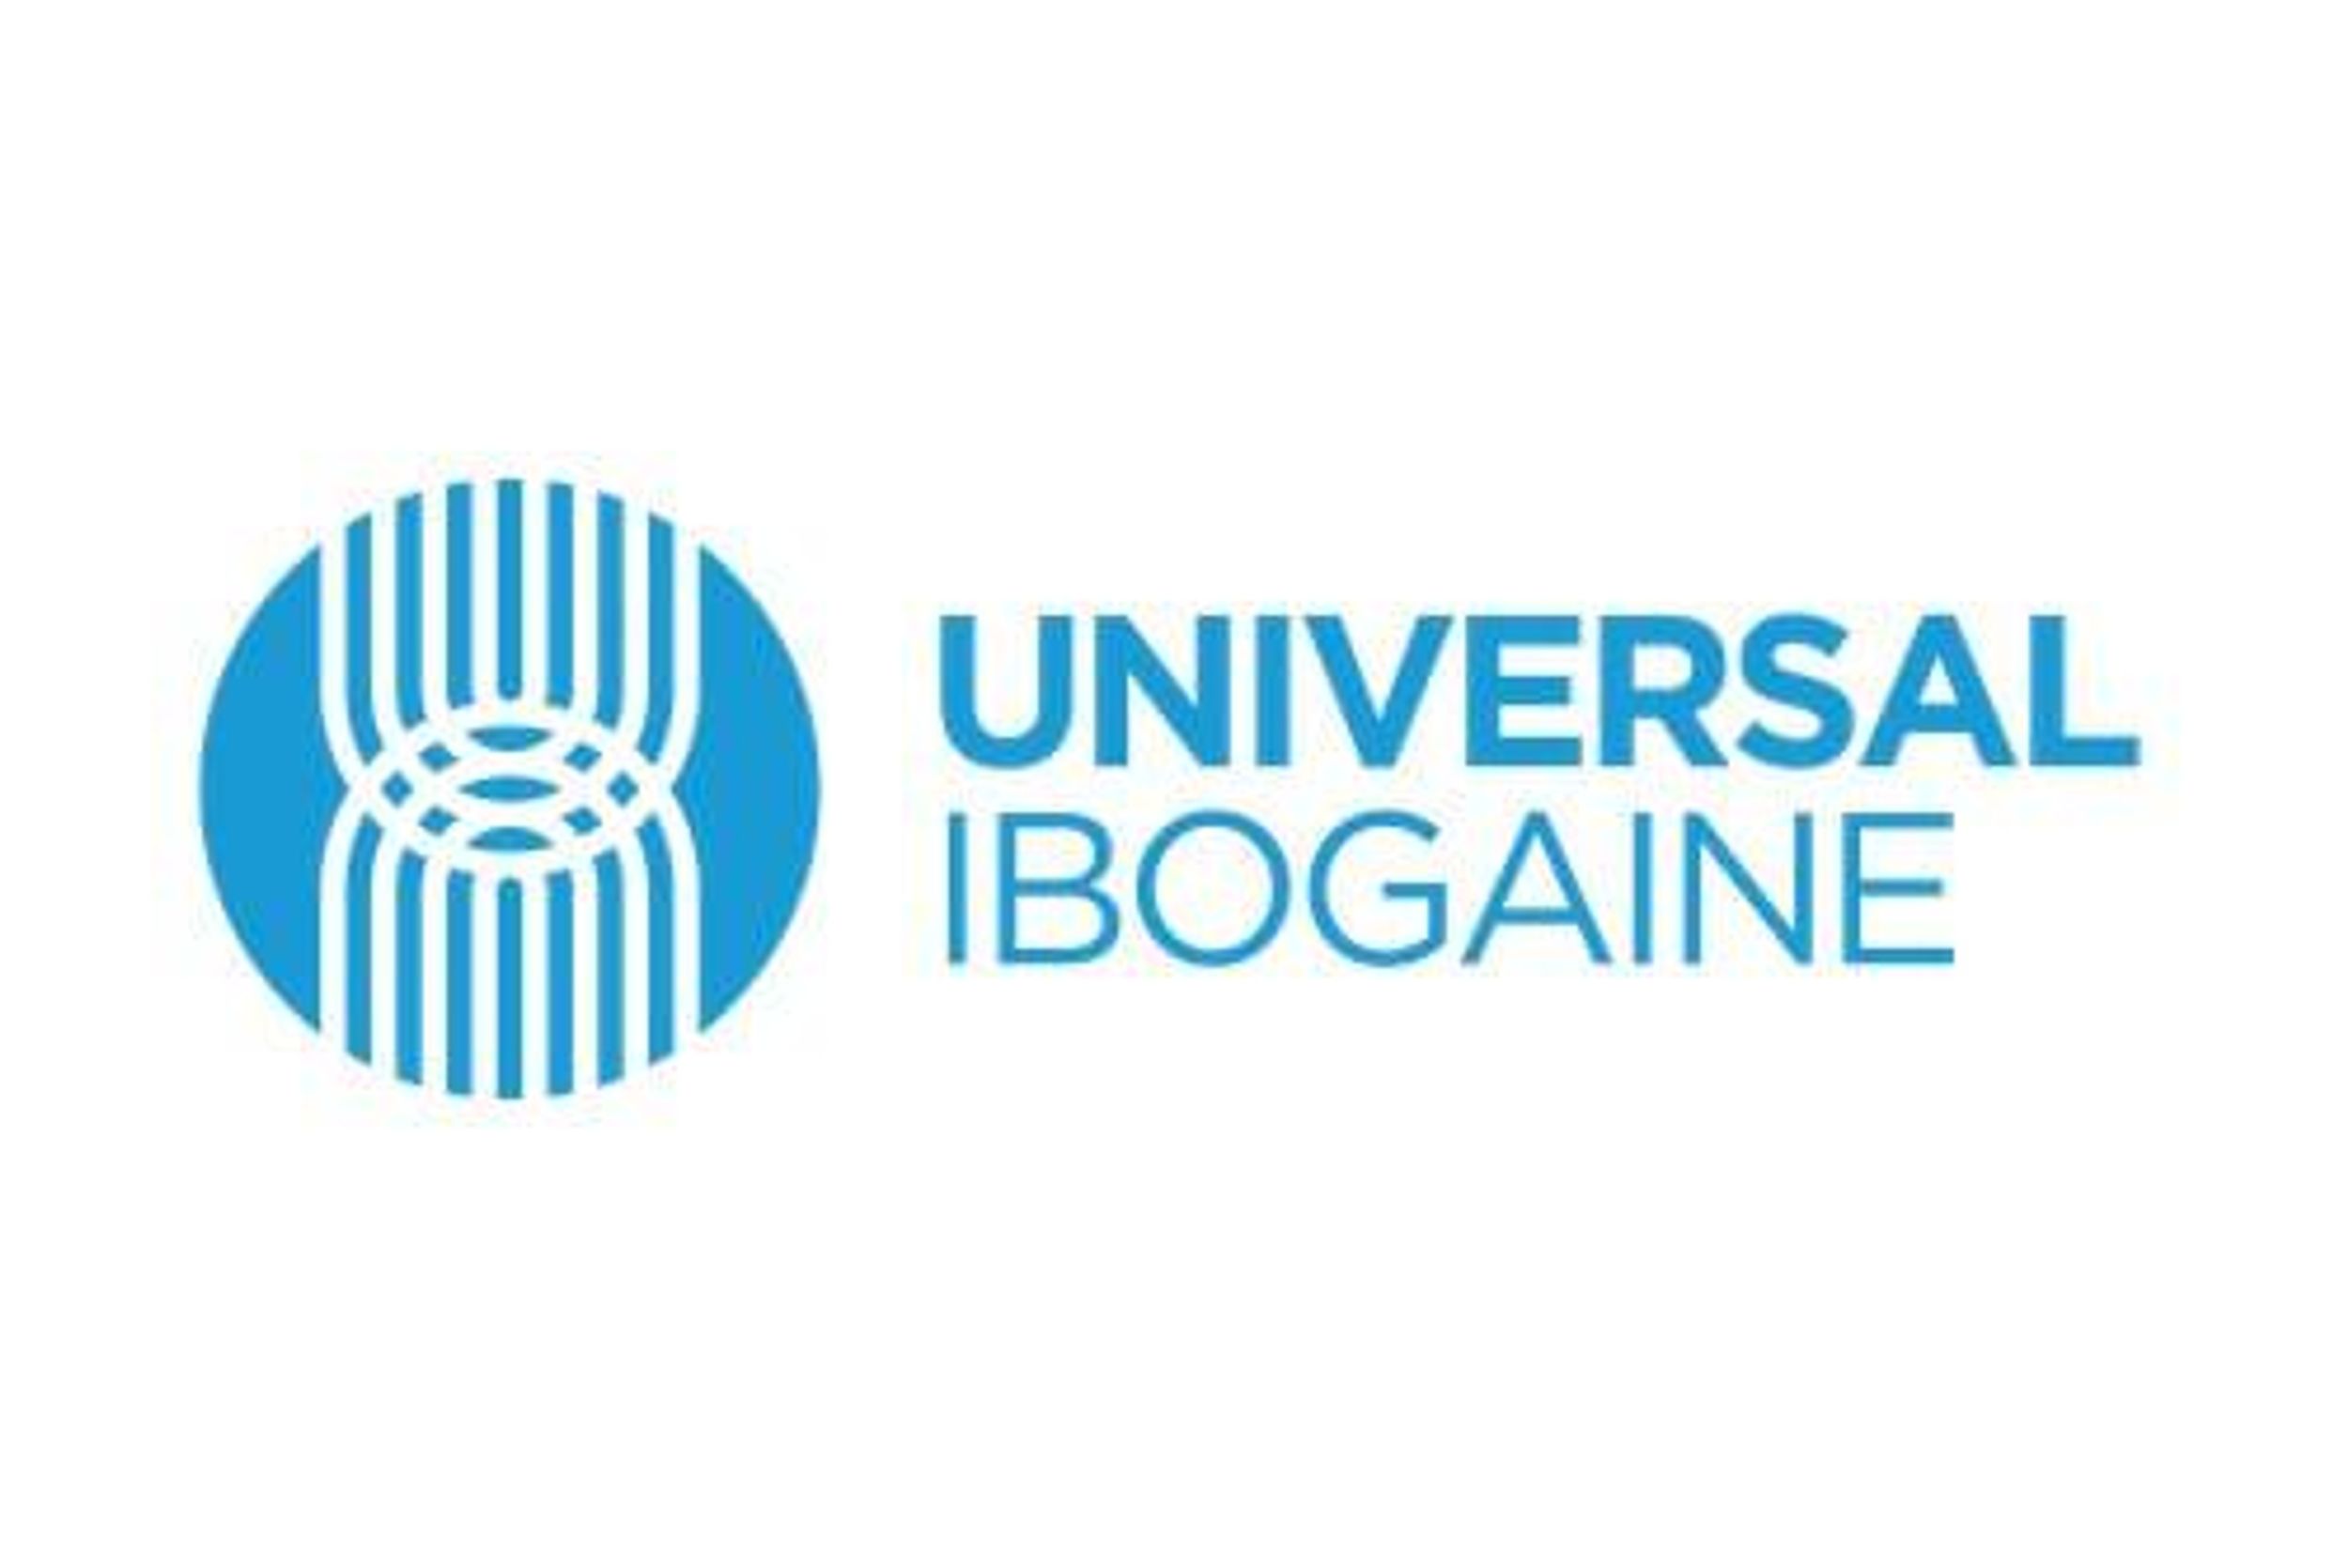 UNIVERSAL IBOGAINE COMMENCES DEVELOPMENT PLAN AT KELBURN IN PREPARATION FOR IBOGAINE TREATMENTS AND PROVIDES UPDATE ON DRUG SUPPLY